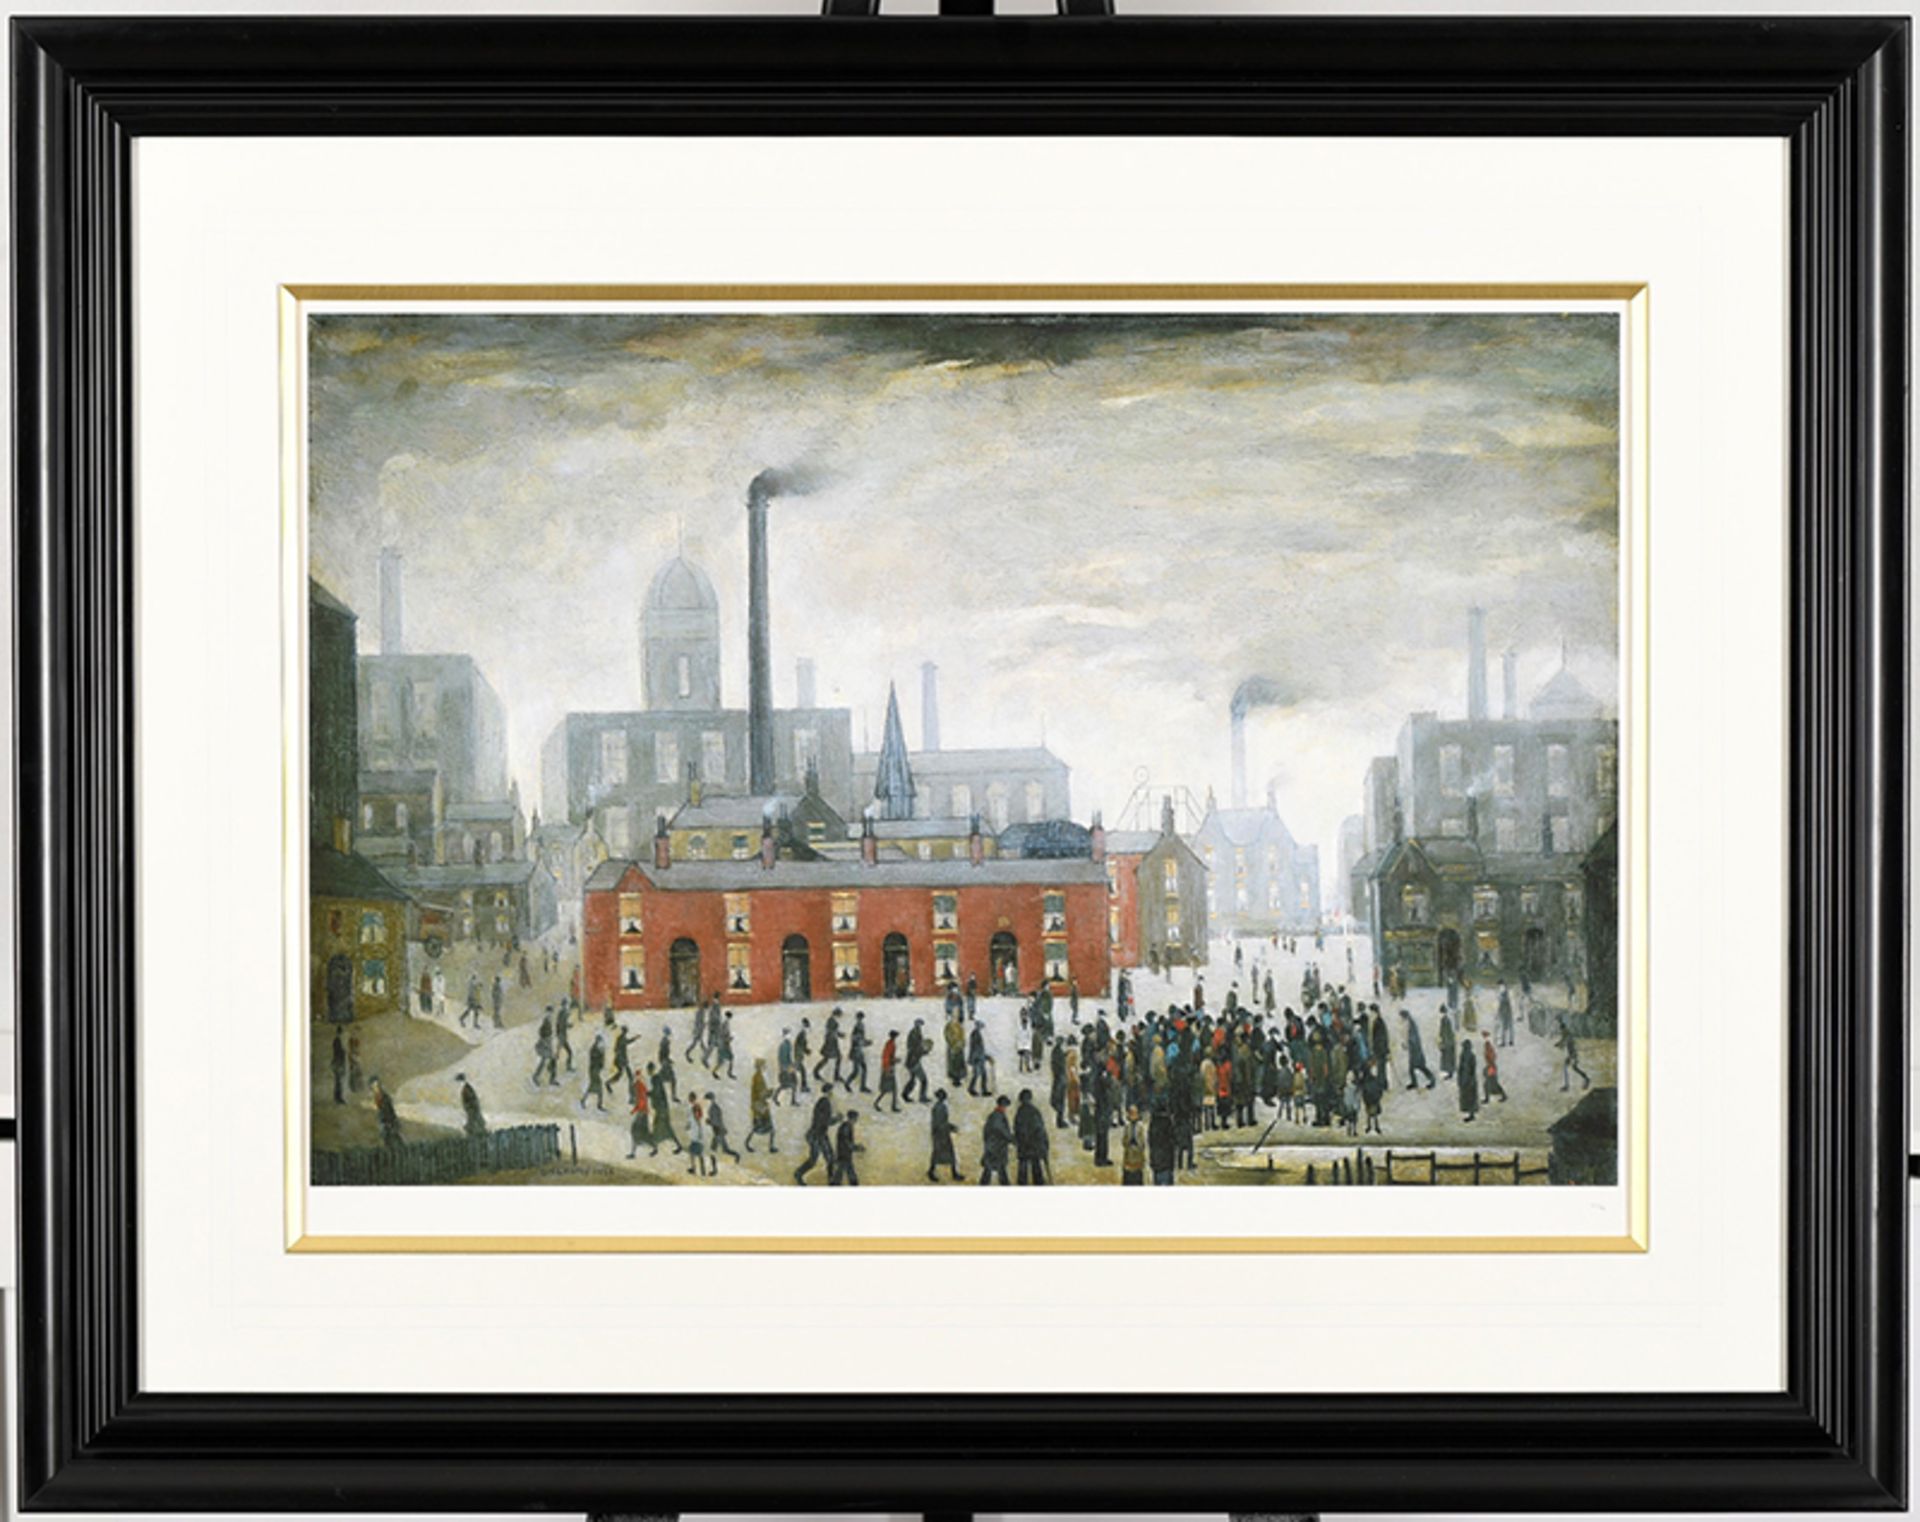 L.S. Lowry Limited Edition "An Accident"